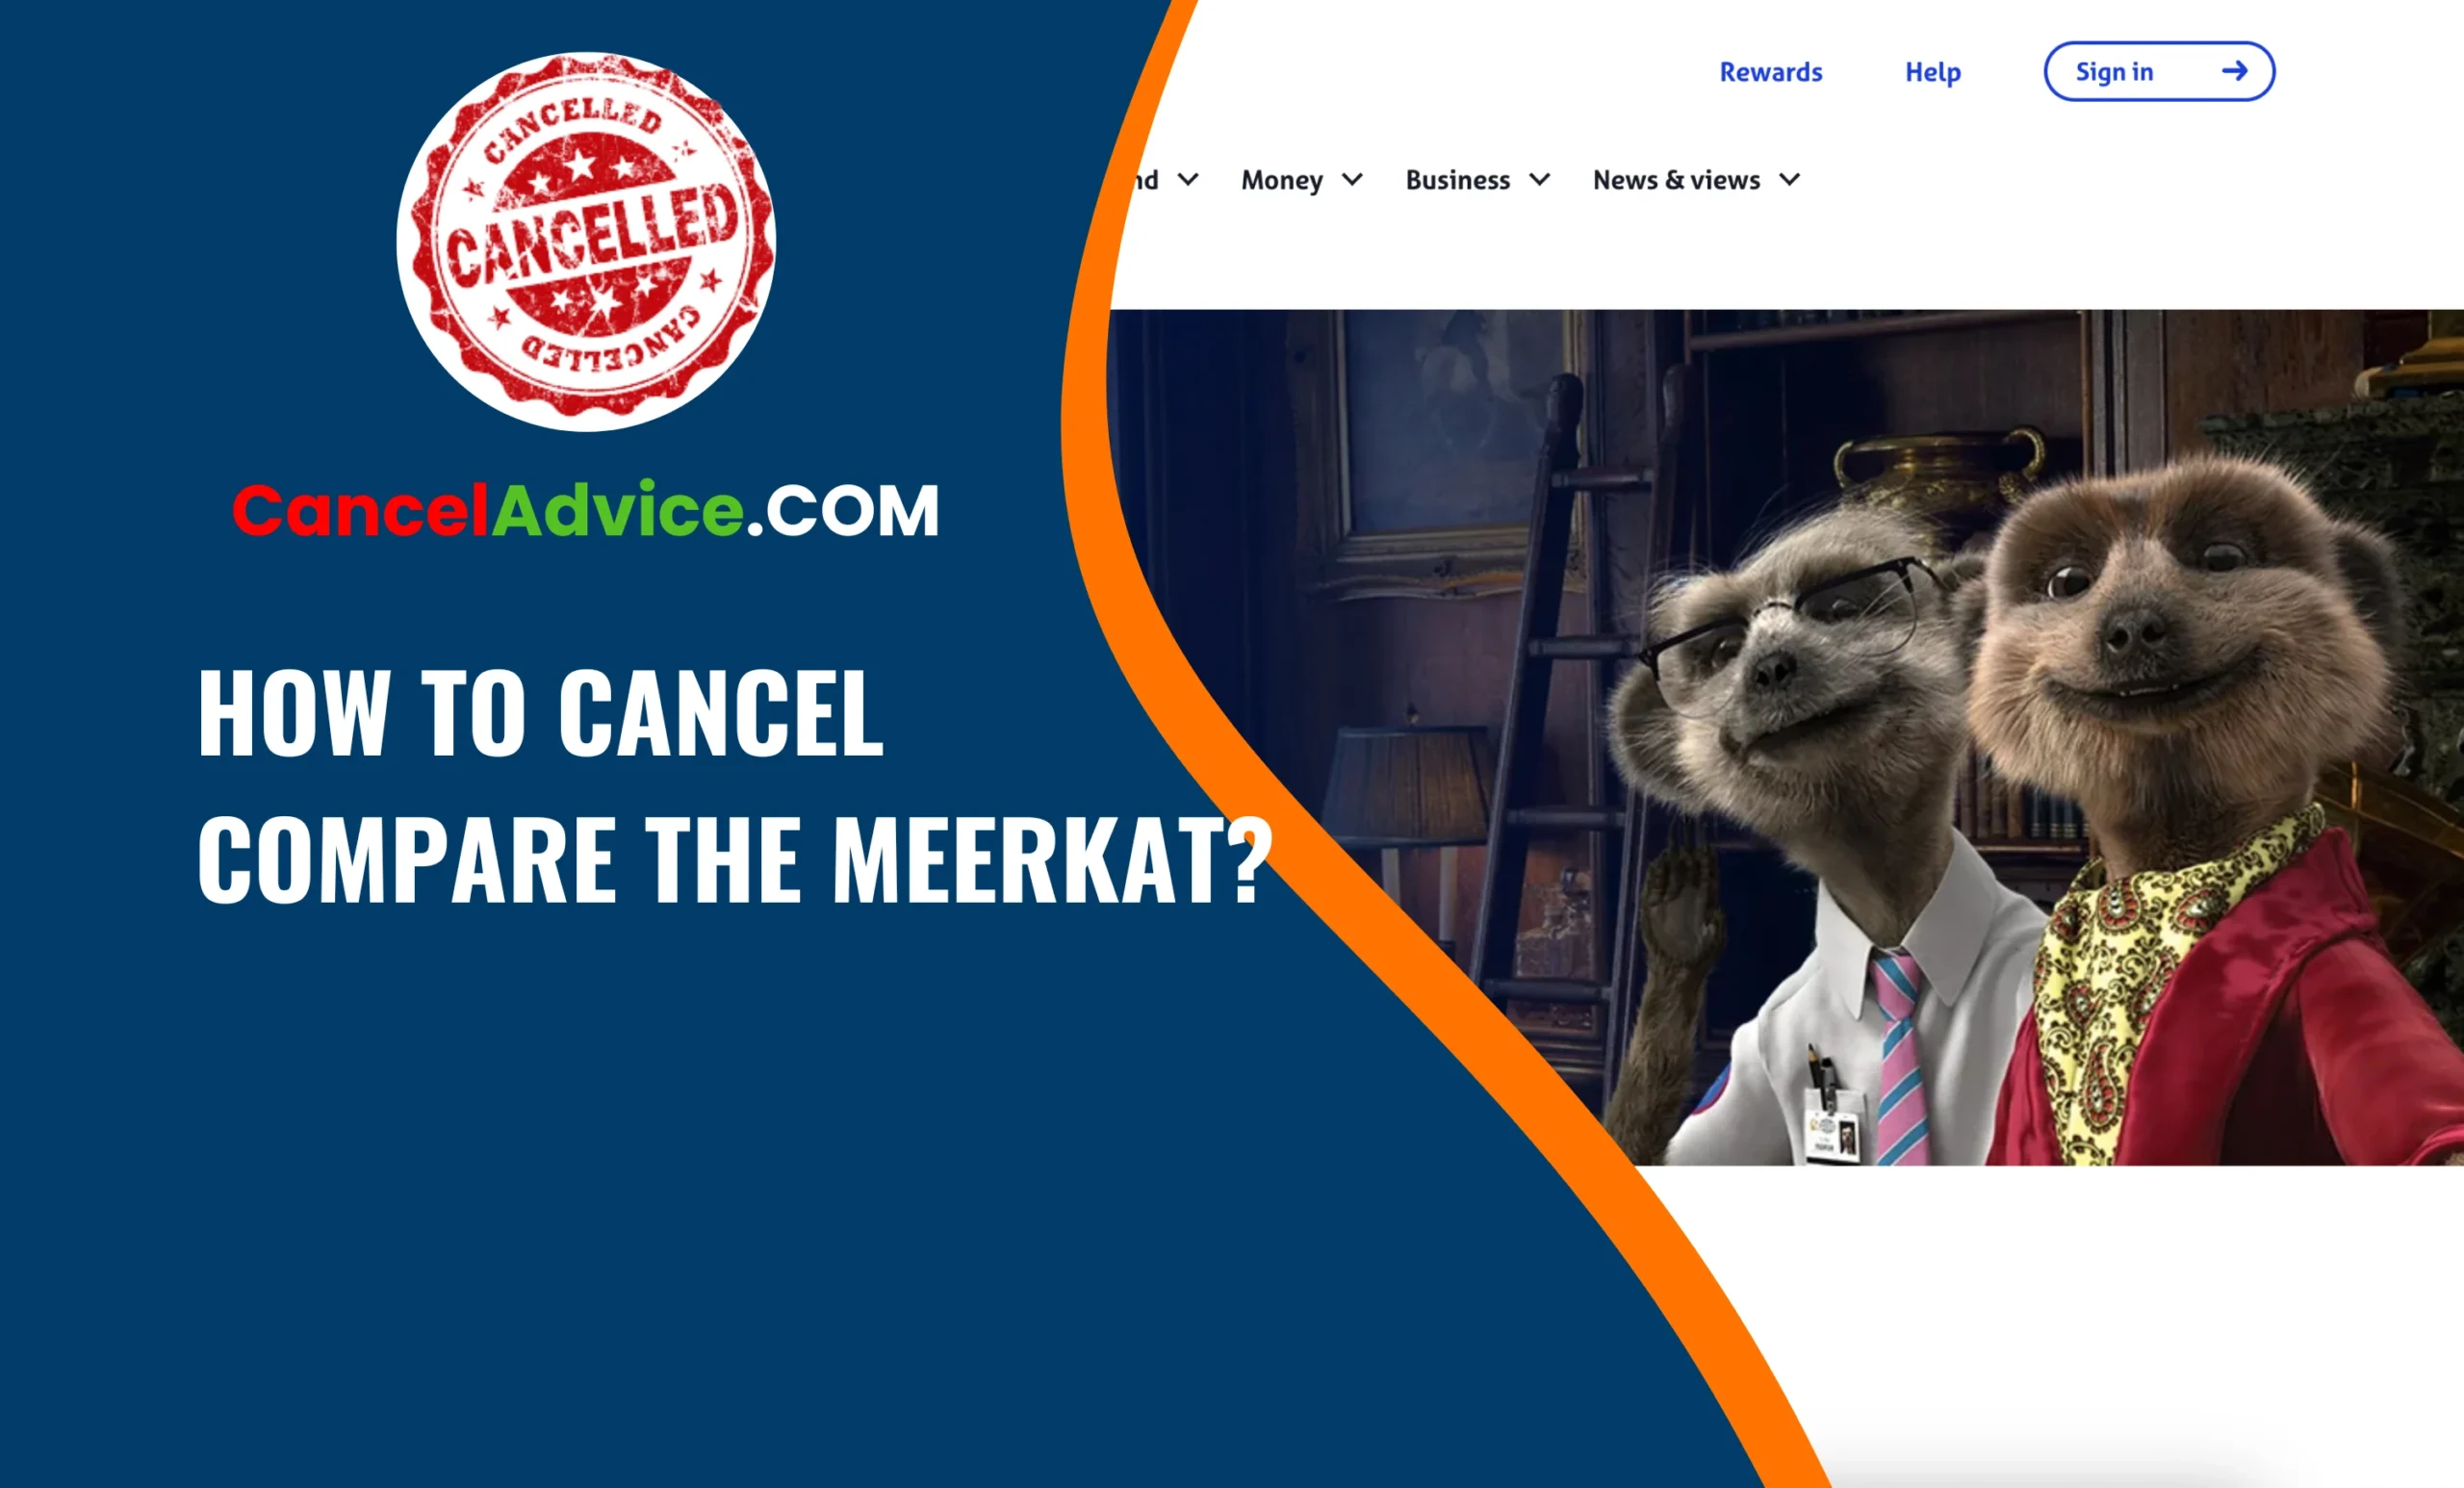 How to Cancel Compare the Meerkat